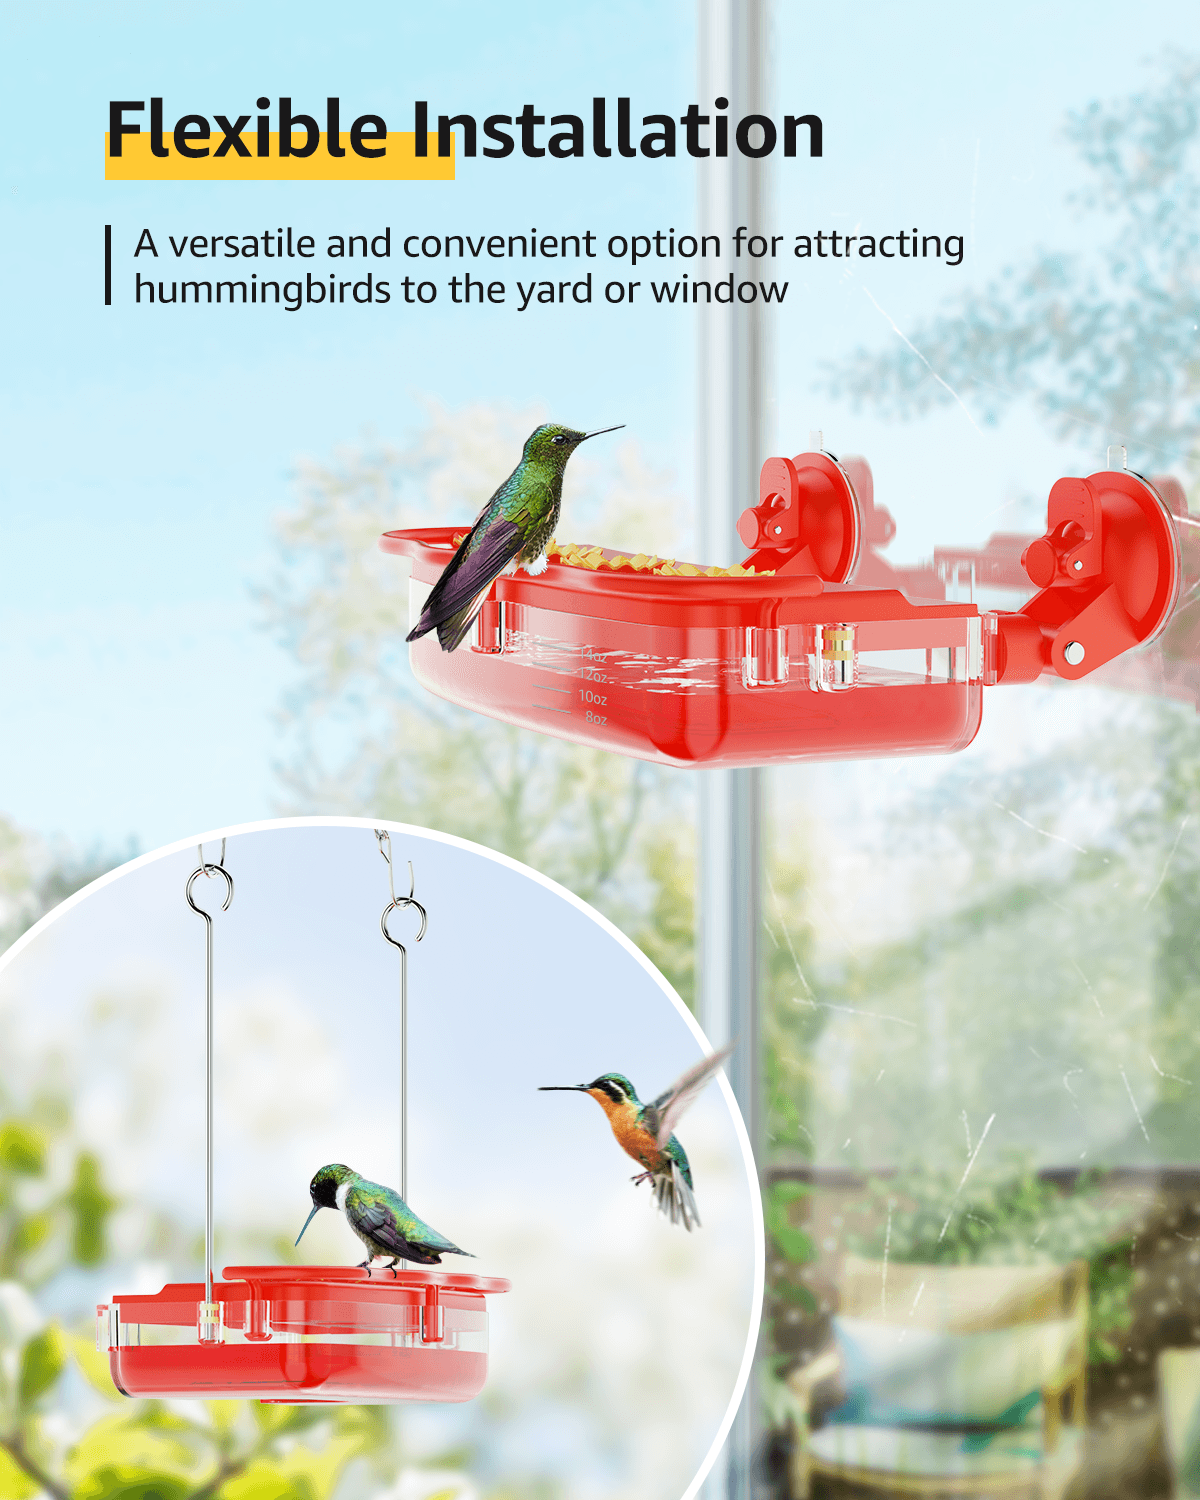 Flexible Installation. A versatile and convenient option for attracting hummingbirds to the yard or window.